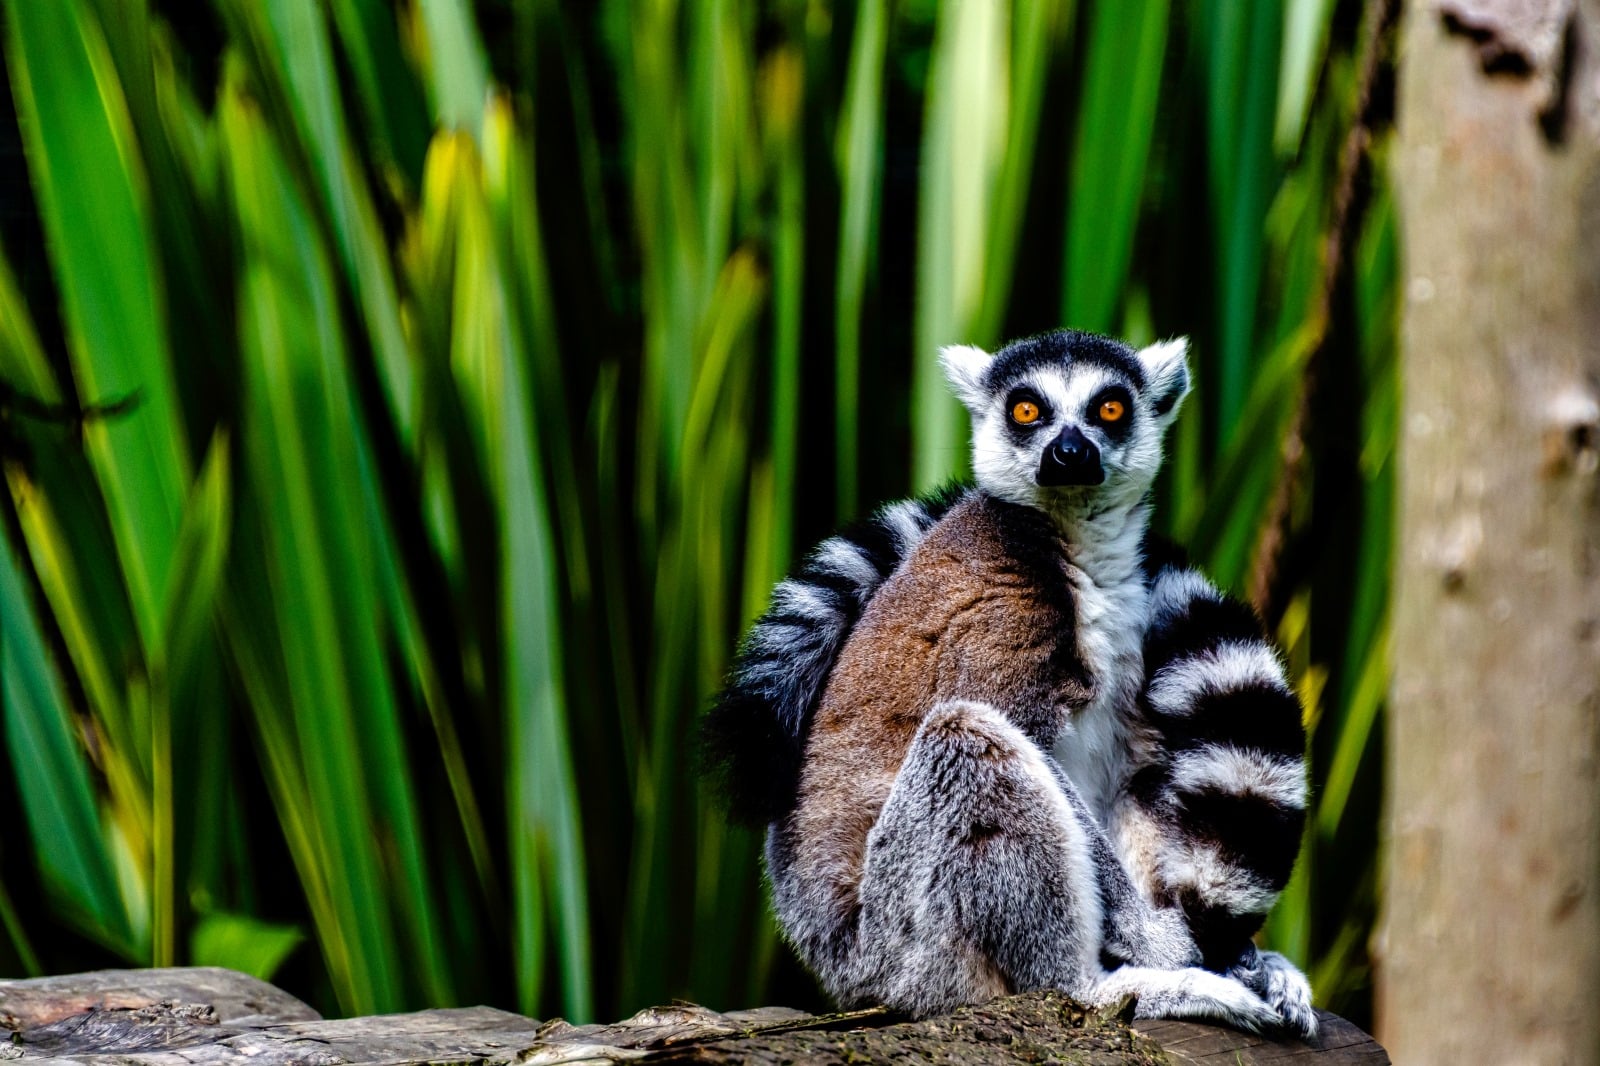 <p><span>Madagascar’s unique wildlife, including various species of lemurs, chameleons, and endemic birds, makes it a fascinating destination for photographers. The island’s diverse landscapes, from rainforests to deserts, add to the photographic appeal. When photographing in Madagascar, it’s important to be mindful of the delicate ecosystems and the conservation challenges.</span></p> <p><b>Insider’s Tip: </b><span>Be patient and quiet to increase your chances of spotting elusive wildlife.</span></p> <p><b>When To Travel: </b><span>April to December is the best time for wildlife viewing.</span></p> <p><b>How To Get There: </b><span>Fly into Antananarivo, Madagascar’s capital, and travel to wildlife reserves by car or domestic flights.</span></p>